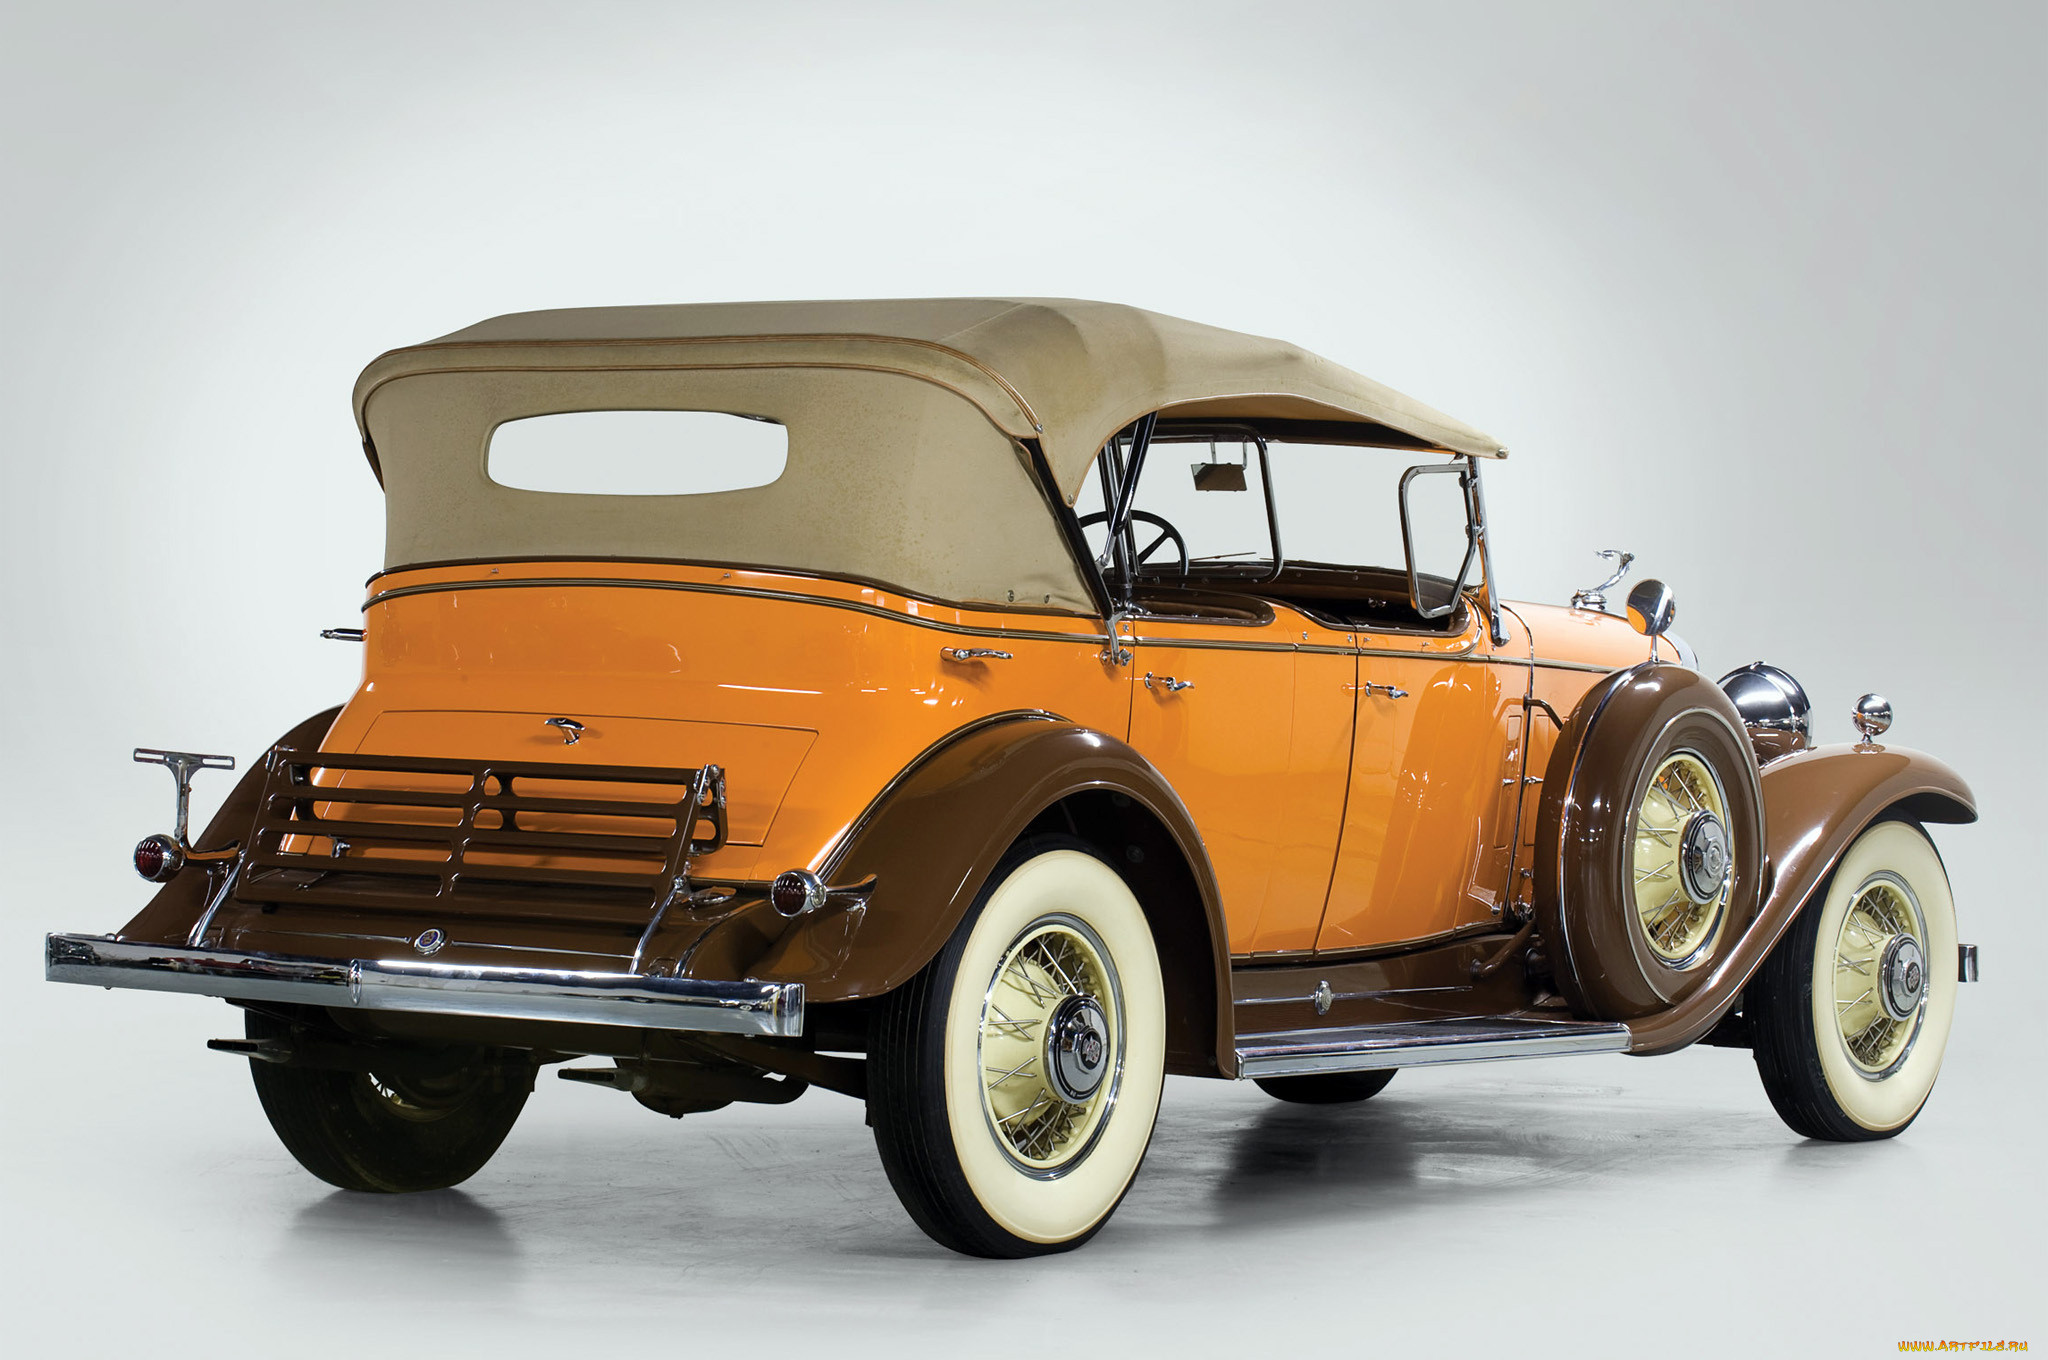 cadillac v12 370 a all weather phaeton by fleetwood 1932, , , 370, v12, all, weather, cadillac, phaeton, 1932, a, fleetwood